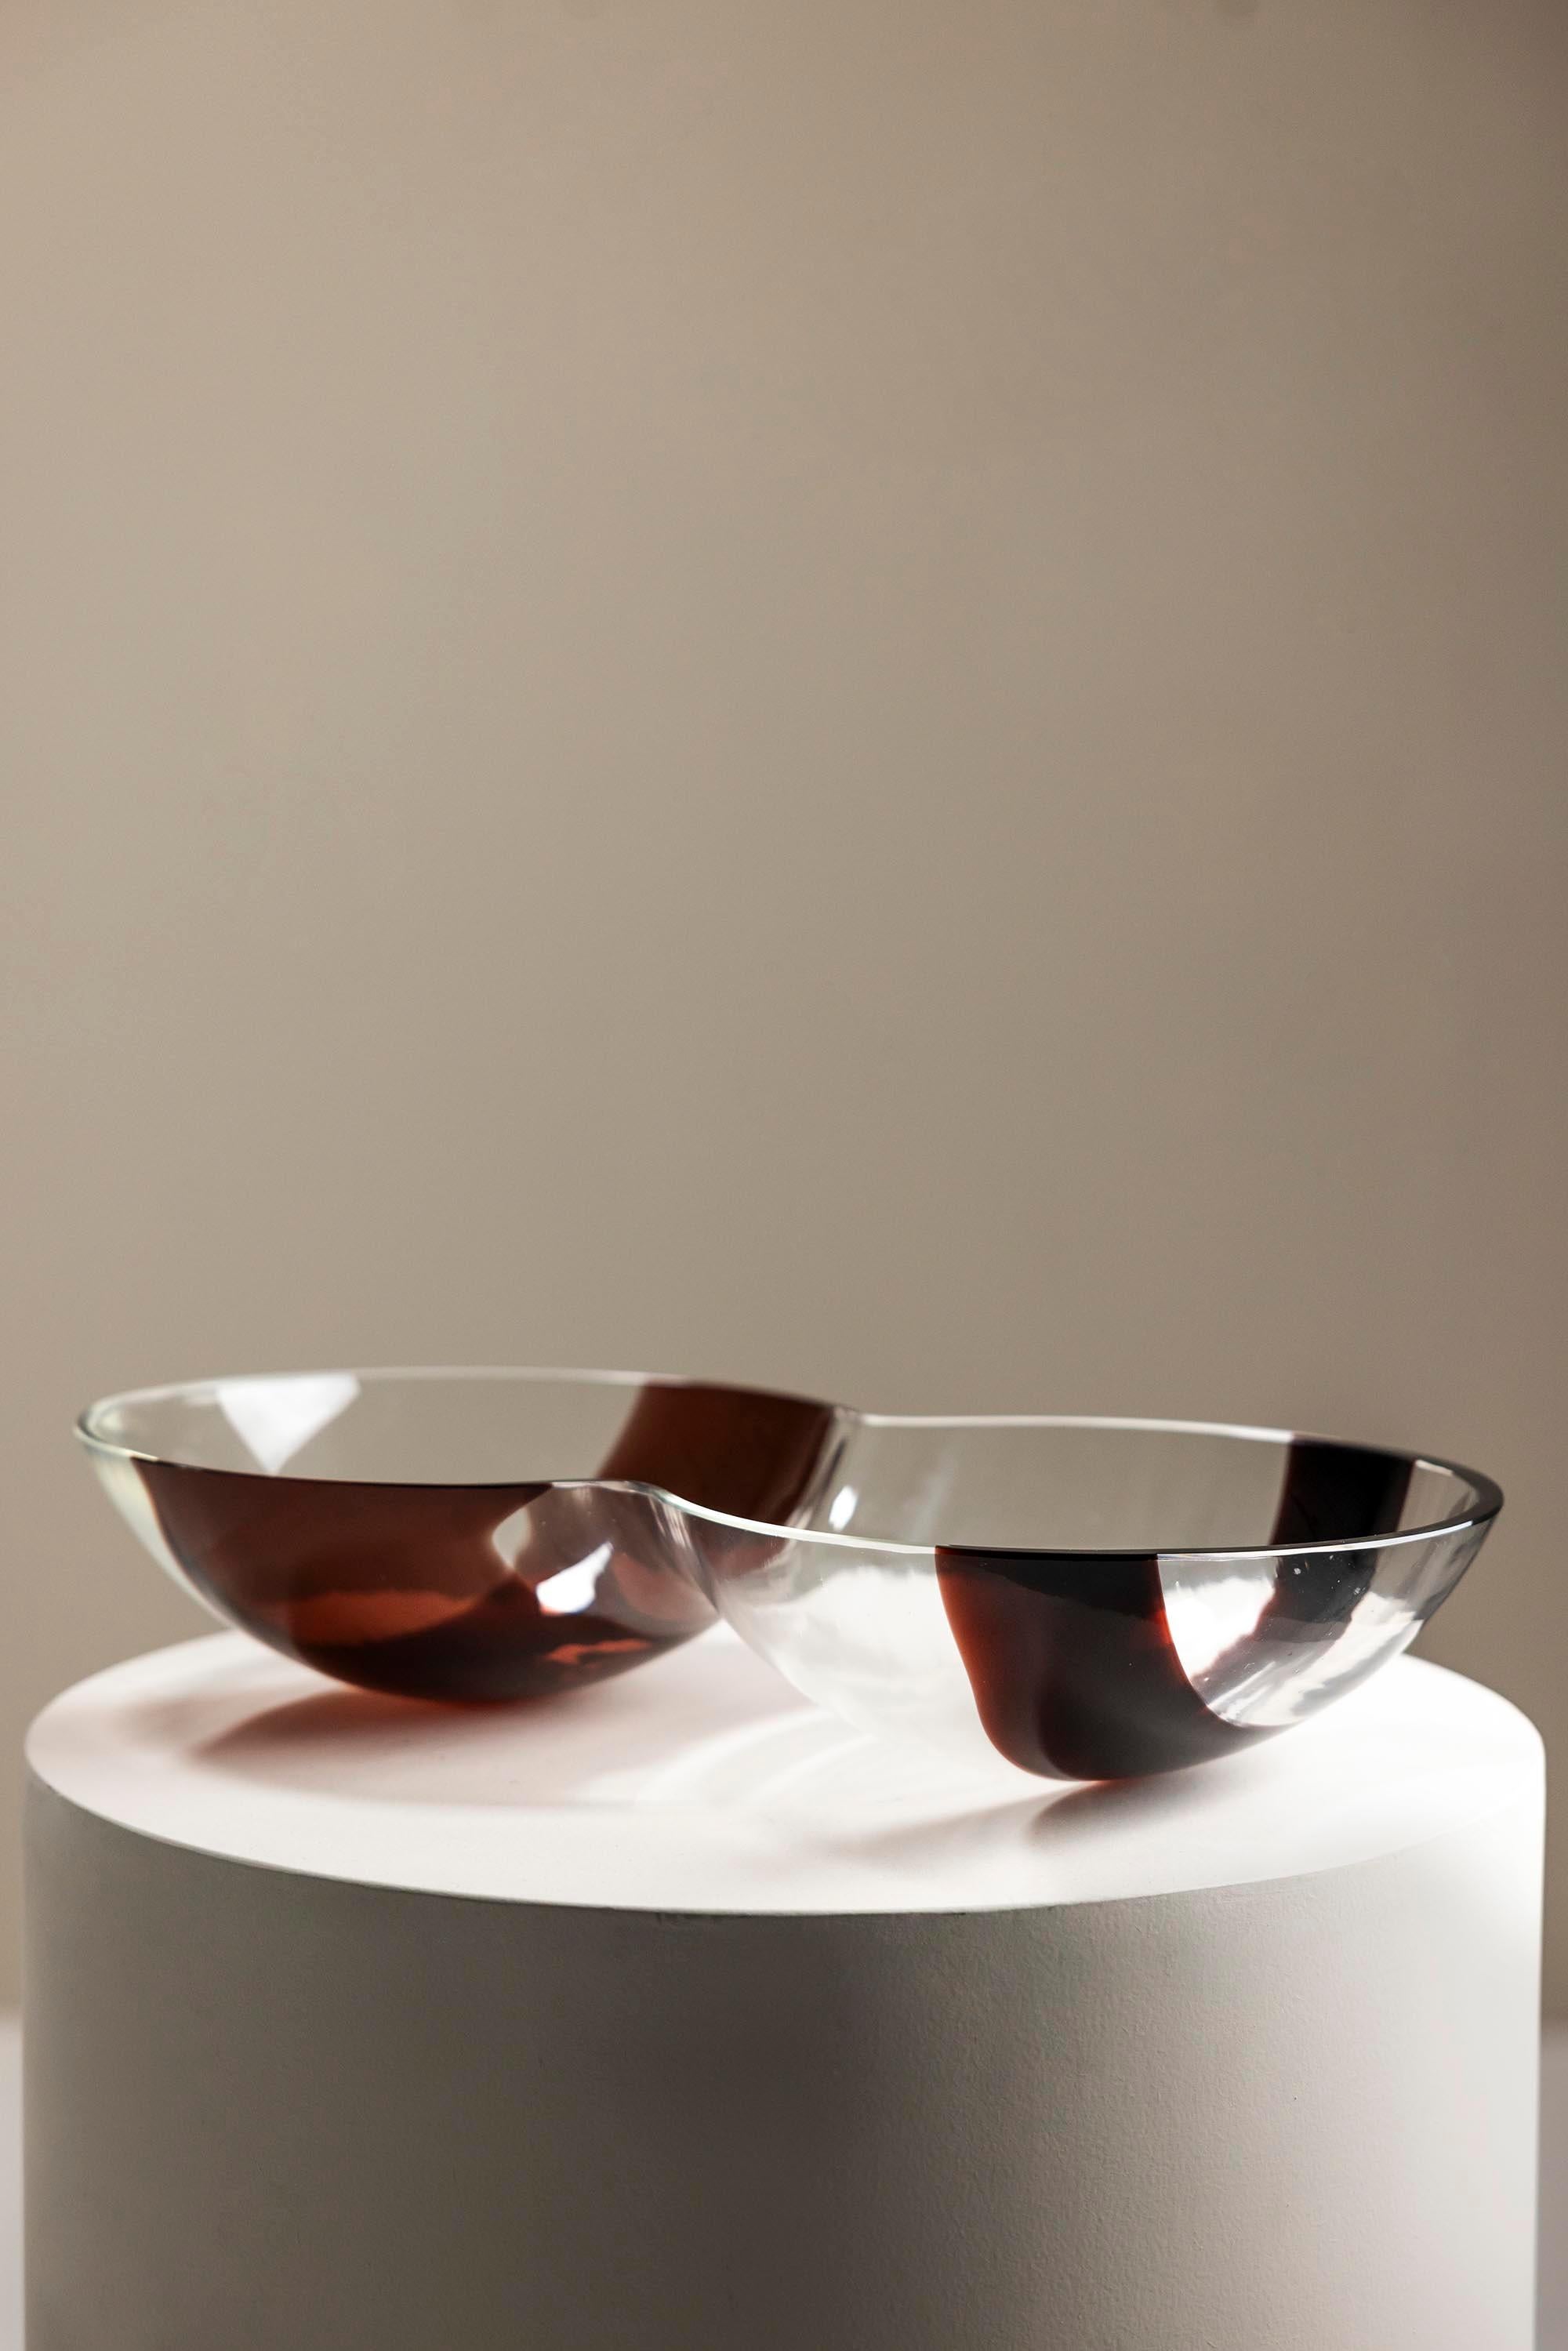 Step into the serene world of Mazzega, where craftsmanship meets creativity. This Carlo Nason glass centerpiece bowl is a harmonious blend of form and function. Its sleek contours draw the eye, while two brown bands add a touch of earthy elegance.